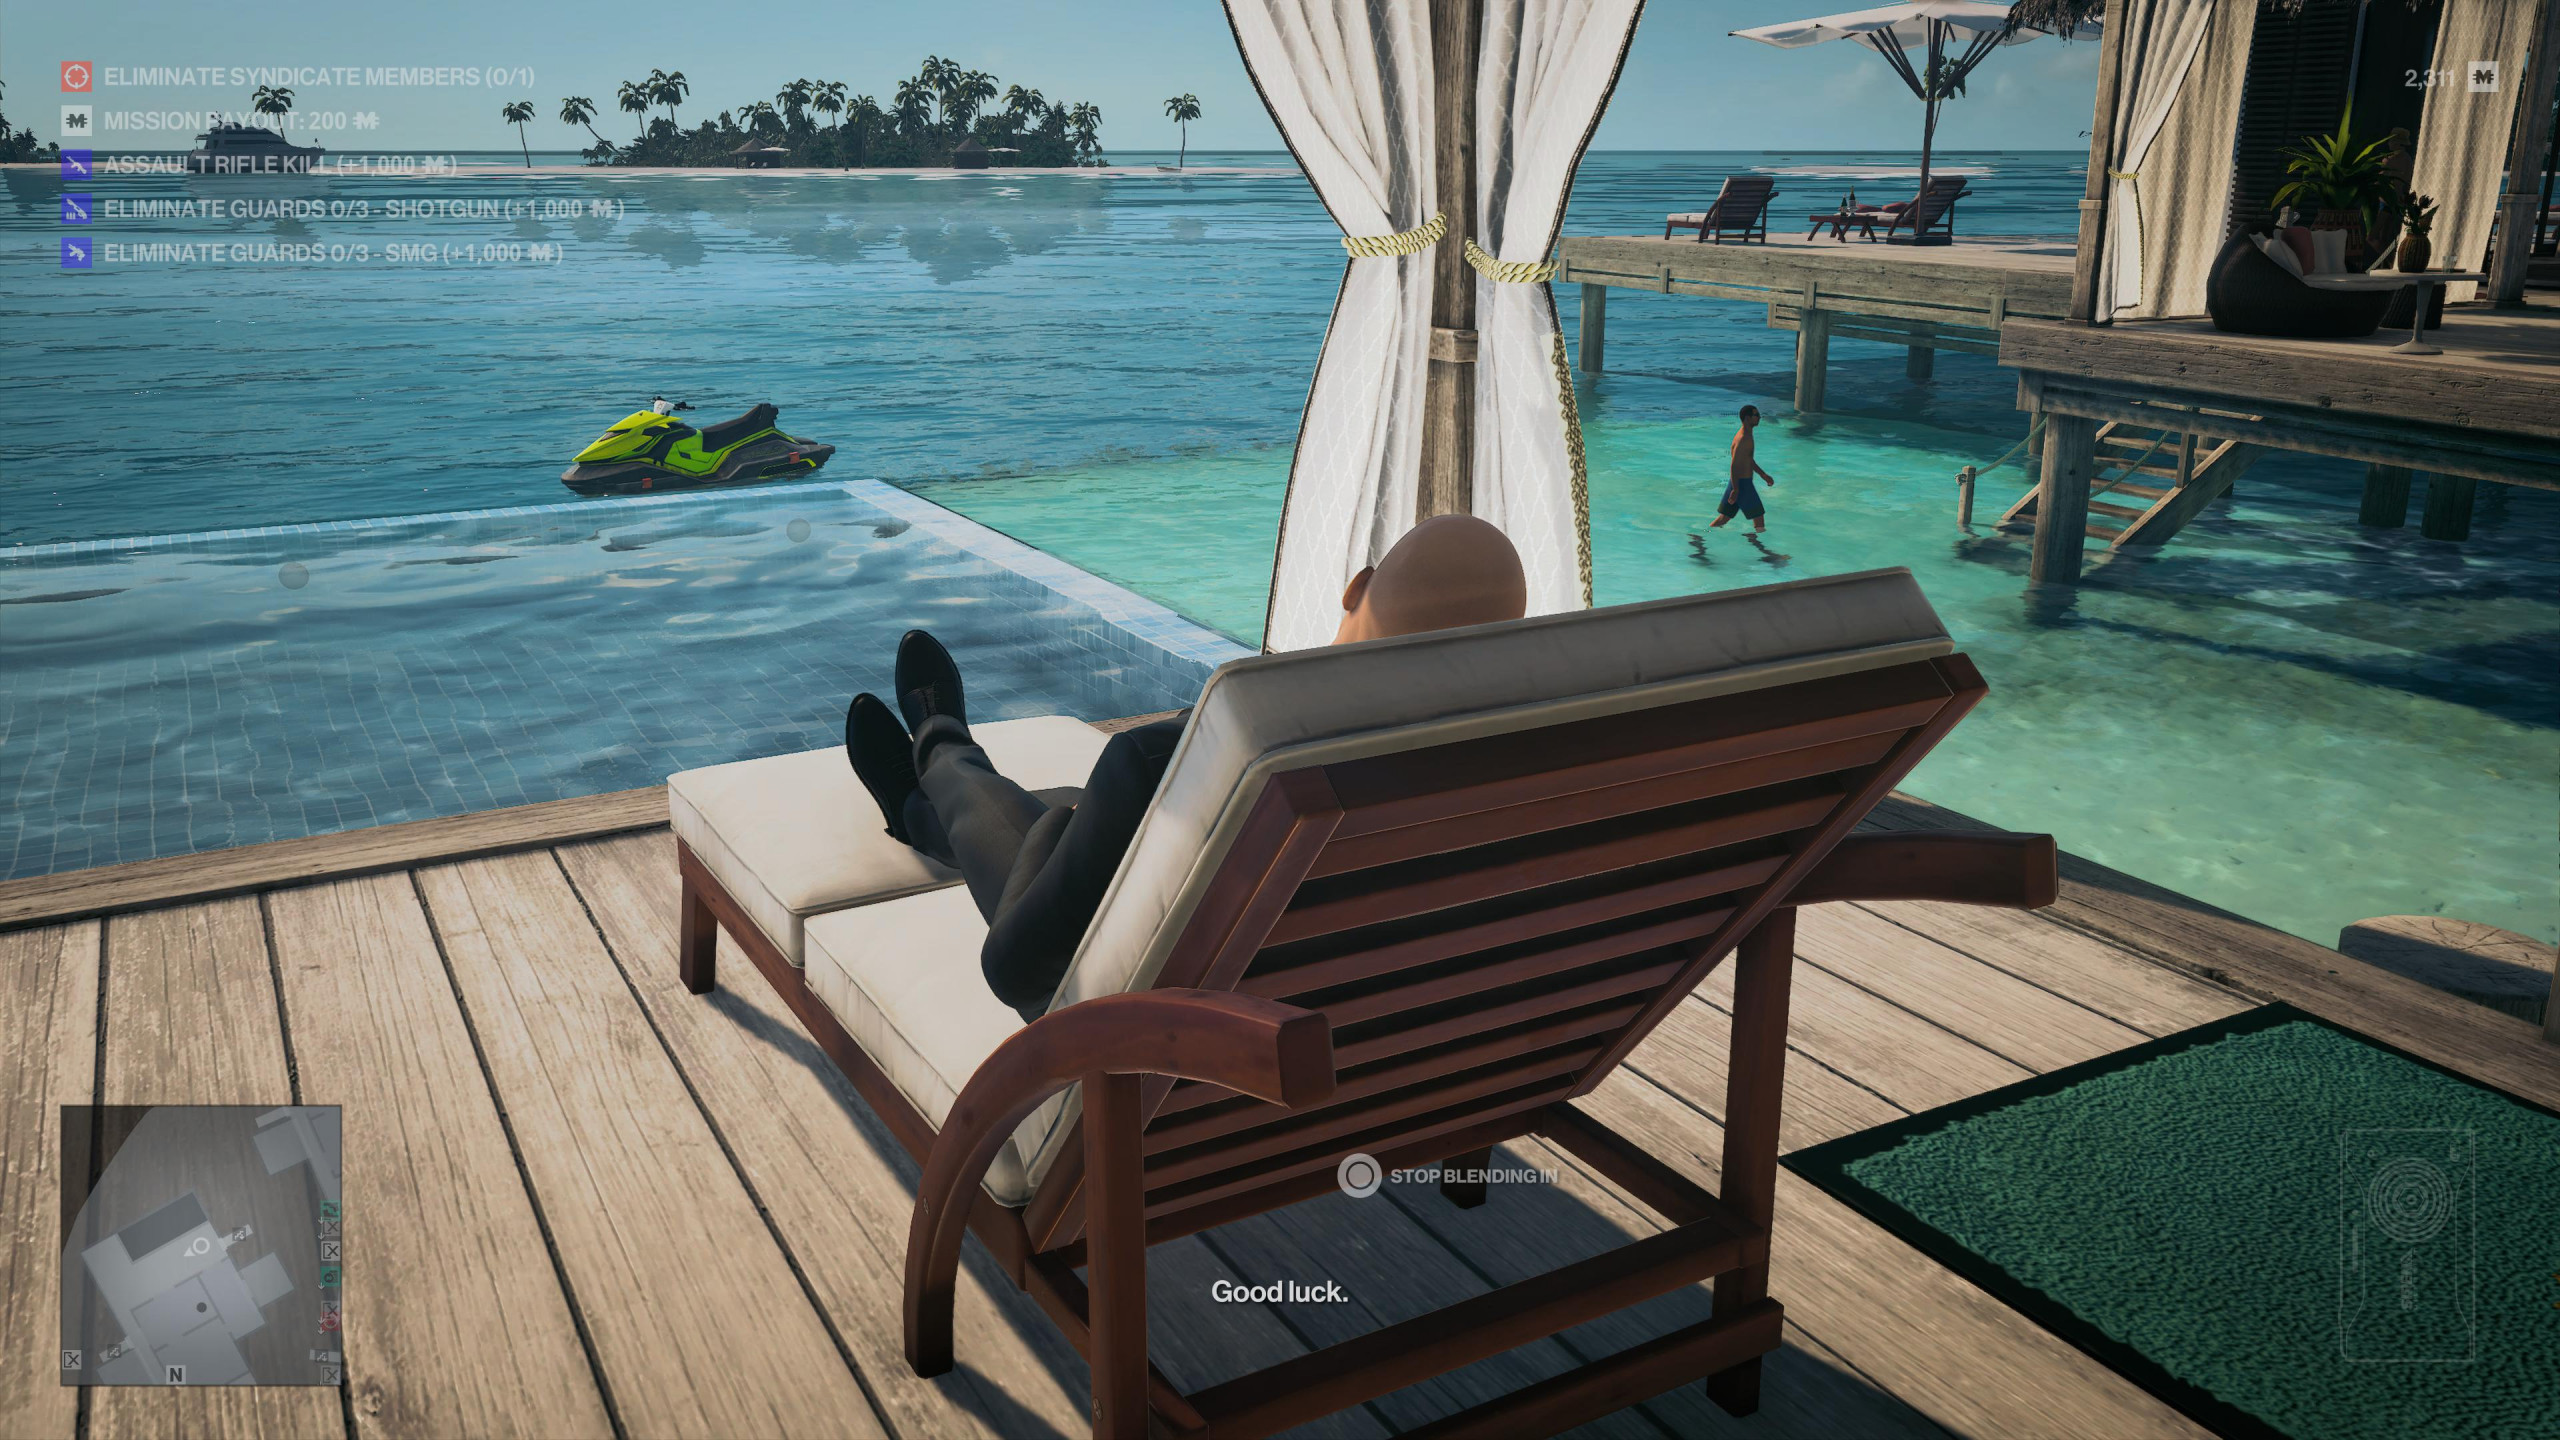 Agent 47 relaxes on a sun lounger in a tropical paradise with turquoise waters in front of him. There are palm trees and sand in the distance